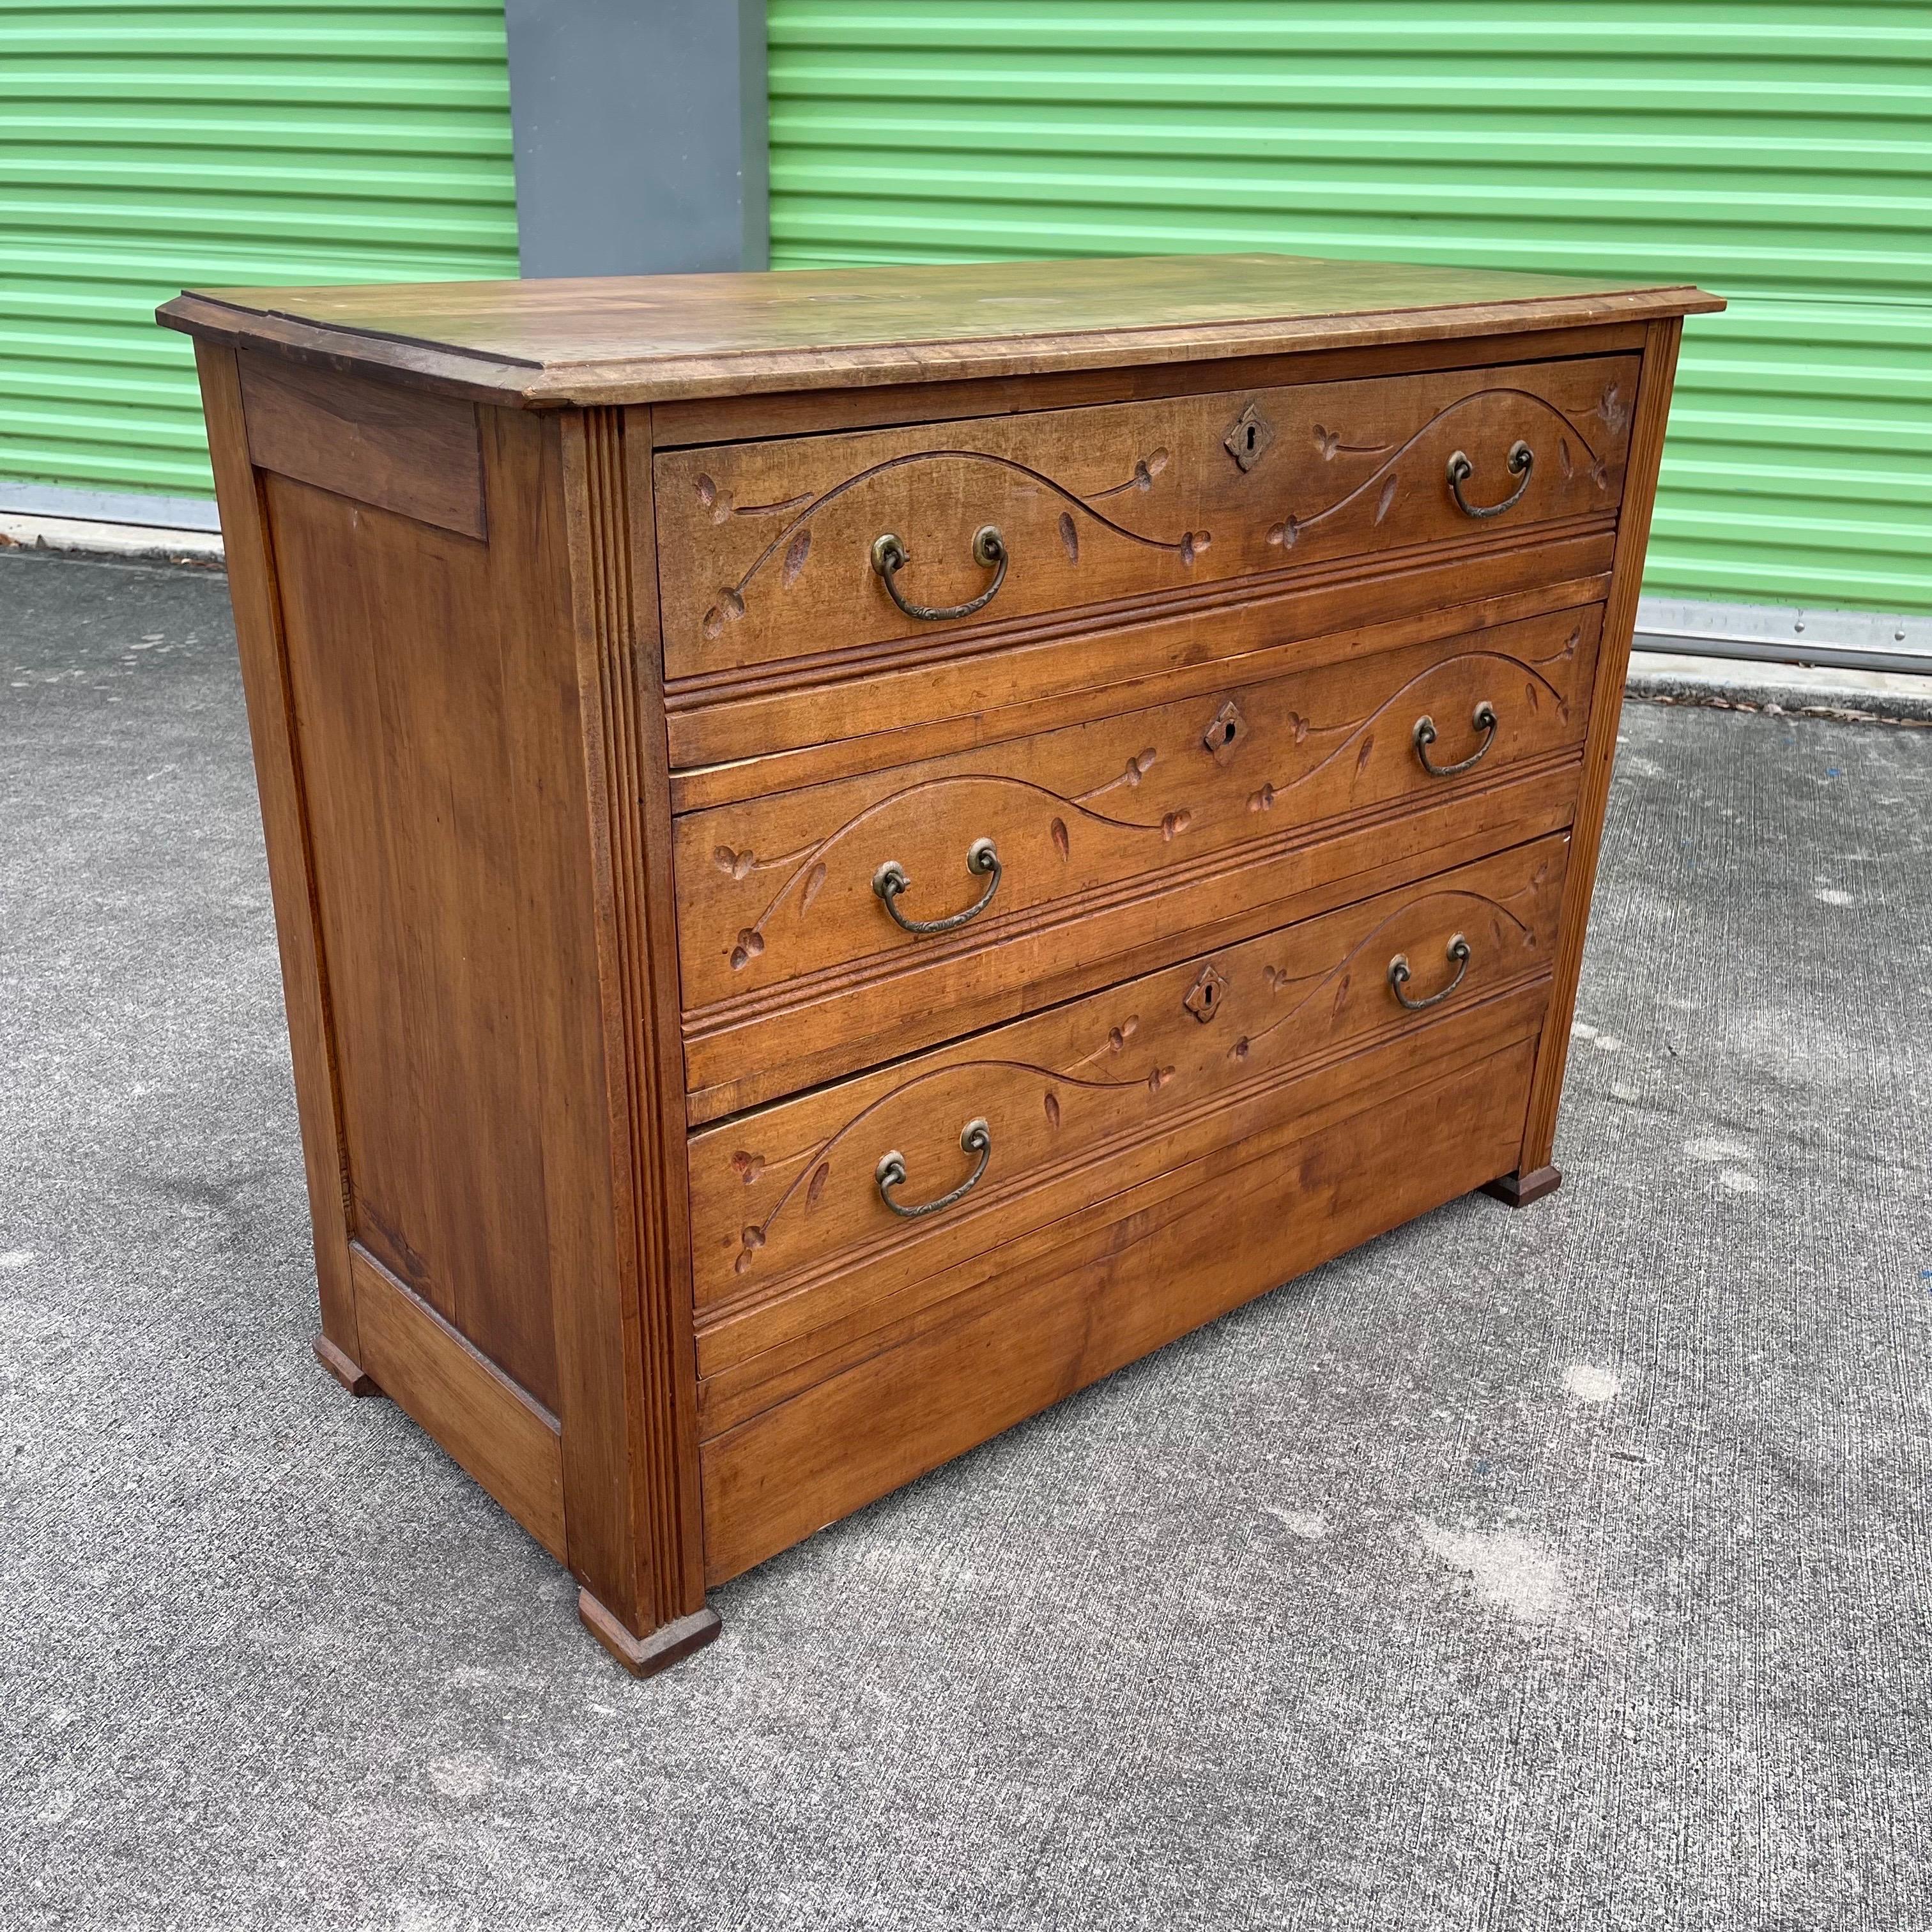 19th Century Eastlake Victorian Carved Wood Dresser Chest of Drawers In Good Condition For Sale In Jensen Beach, FL